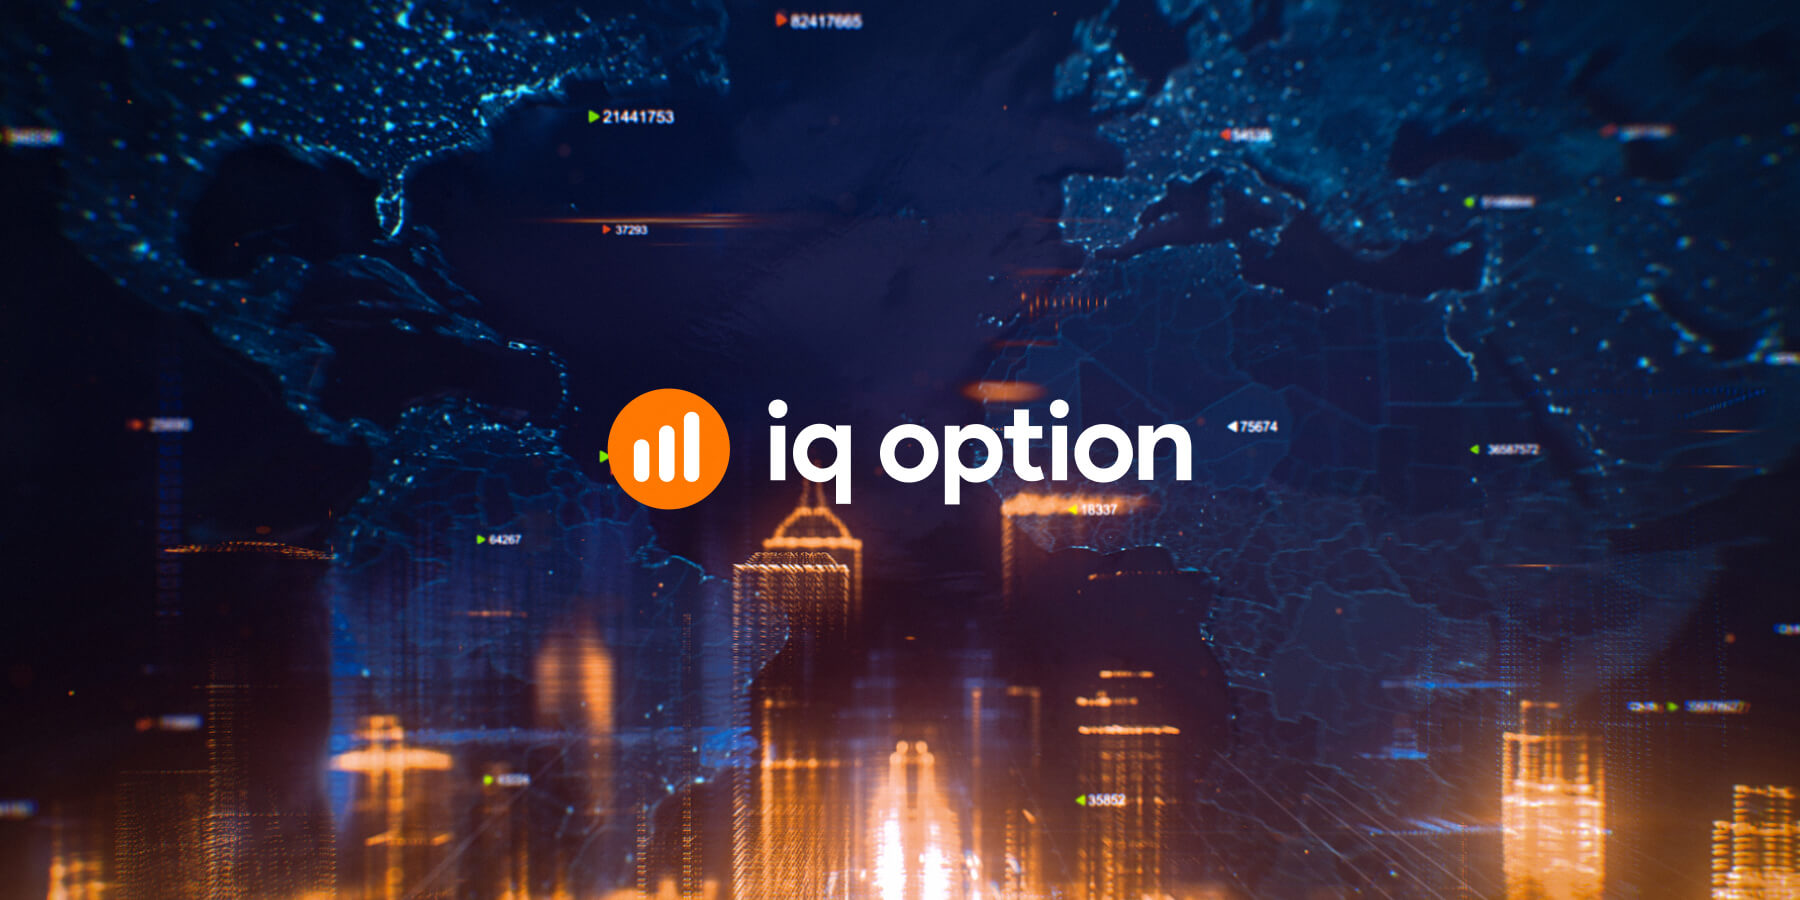 IQ Option - How to Access the Platform and Troubleshoot Issues